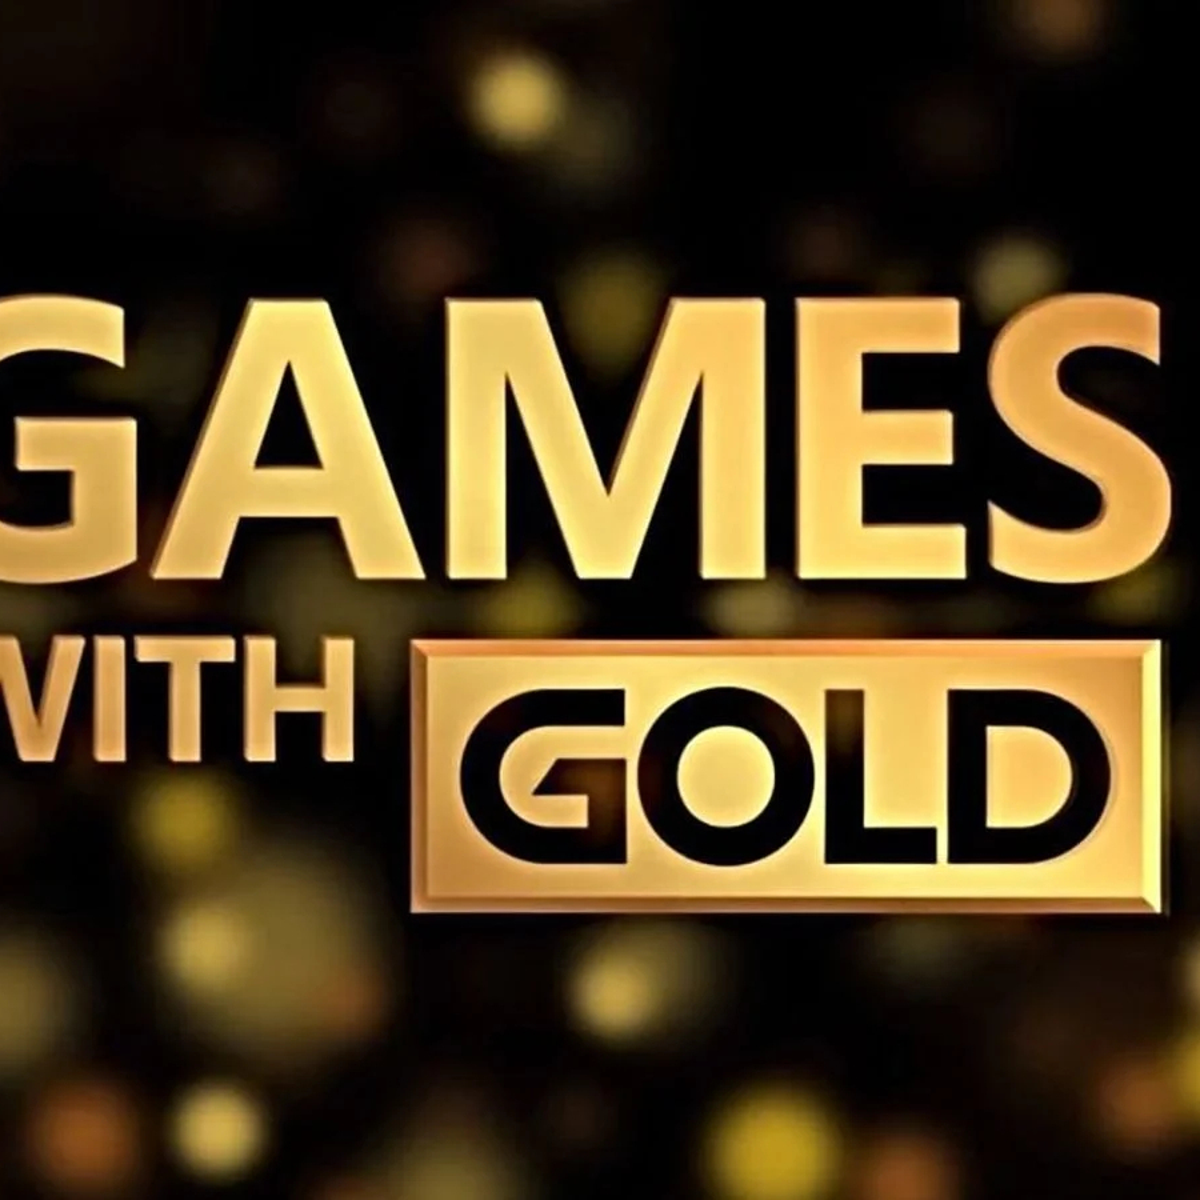 Xbox Live Gold - Abril de 2023: Games With Gold mes en Xbox Series X/S y Xbox One | Eurogamer.es